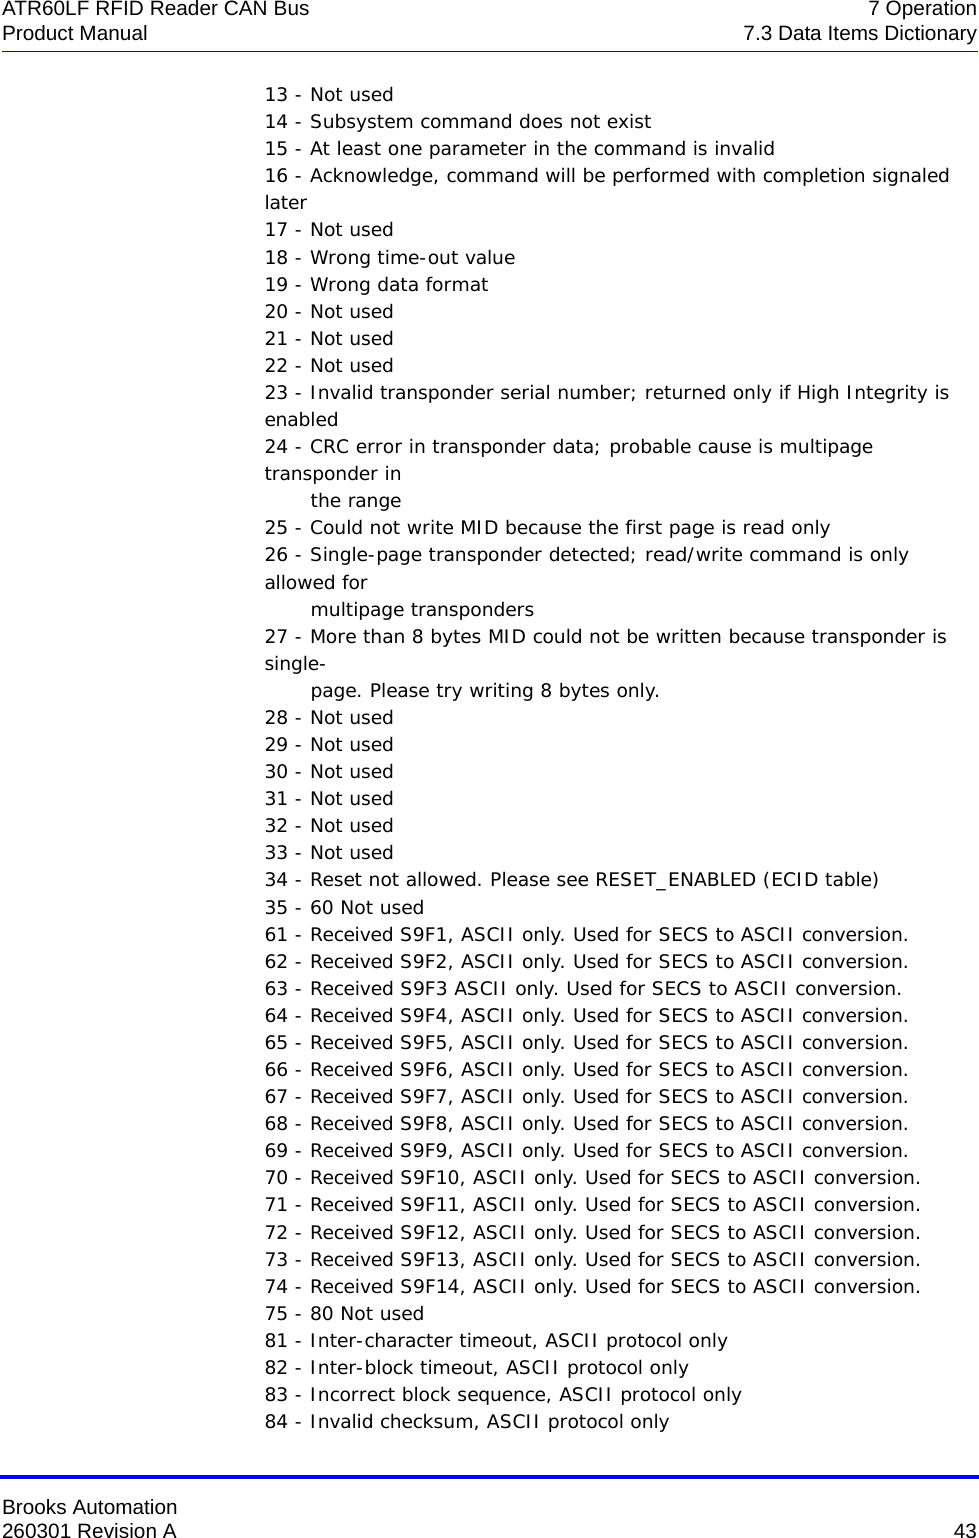 Brooks Automation260301 Revision A  43ATR60LF RFID Reader CAN Bus 7 OperationProduct Manual 7.3 Data Items Dictionary13 - Not used 14 - Subsystem command does not exist 15 - At least one parameter in the command is invalid 16 - Acknowledge, command will be performed with completion signaled later 17 - Not used 18 - Wrong time-out value 19 - Wrong data format 20 - Not used 21 - Not used 22 - Not used 23 - Invalid transponder serial number; returned only if High Integrity is enabled 24 - CRC error in transponder data; probable cause is multipage transponder in         the range 25 - Could not write MID because the first page is read only 26 - Single-page transponder detected; read/write command is only allowed for        multipage transponders 27 - More than 8 bytes MID could not be written because transponder is single-        page. Please try writing 8 bytes only. 28 - Not used 29 - Not used 30 - Not used 31 - Not used 32 - Not used 33 - Not used 34 - Reset not allowed. Please see RESET_ENABLED (ECID table) 35 - 60 Not used 61 - Received S9F1, ASCII only. Used for SECS to ASCII conversion. 62 - Received S9F2, ASCII only. Used for SECS to ASCII conversion. 63 - Received S9F3 ASCII only. Used for SECS to ASCII conversion. 64 - Received S9F4, ASCII only. Used for SECS to ASCII conversion. 65 - Received S9F5, ASCII only. Used for SECS to ASCII conversion. 66 - Received S9F6, ASCII only. Used for SECS to ASCII conversion. 67 - Received S9F7, ASCII only. Used for SECS to ASCII conversion. 68 - Received S9F8, ASCII only. Used for SECS to ASCII conversion. 69 - Received S9F9, ASCII only. Used for SECS to ASCII conversion. 70 - Received S9F10, ASCII only. Used for SECS to ASCII conversion. 71 - Received S9F11, ASCII only. Used for SECS to ASCII conversion. 72 - Received S9F12, ASCII only. Used for SECS to ASCII conversion. 73 - Received S9F13, ASCII only. Used for SECS to ASCII conversion. 74 - Received S9F14, ASCII only. Used for SECS to ASCII conversion. 75 - 80 Not used 81 - Inter-character timeout, ASCII protocol only 82 - Inter-block timeout, ASCII protocol only 83 - Incorrect block sequence, ASCII protocol only 84 - Invalid checksum, ASCII protocol only 